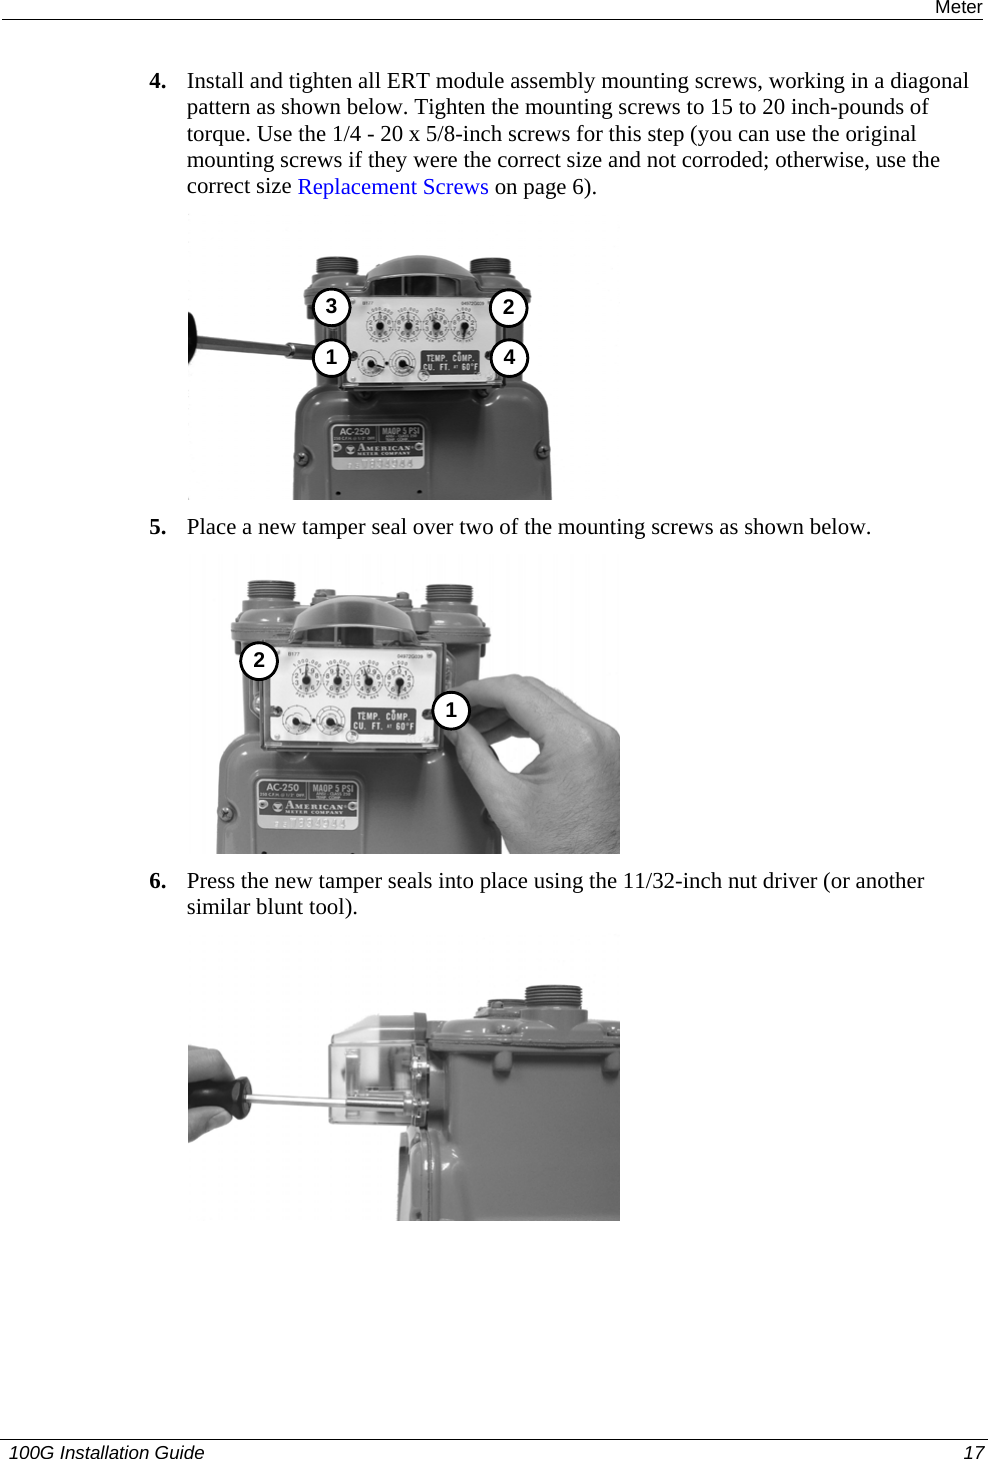  Installing the 100G on an American Meter 4. Install and tighten all ERT module assembly mounting screws, working in a diagonal pattern as shown below. Tighten the mounting screws to 15 to 20 inch-pounds of torque. Use the 1/4 - 20 x 5/8-inch screws for this step (you can use the original mounting screws if they were the correct size and not corroded; otherwise, use the correct size Replacement Screws on page 6).  3412 5. Place a new tamper seal over two of the mounting screws as shown below.  12 6. Press the new tamper seals into place using the 11/32-inch nut driver (or another similar blunt tool).  12  100G Installation Guide  17  